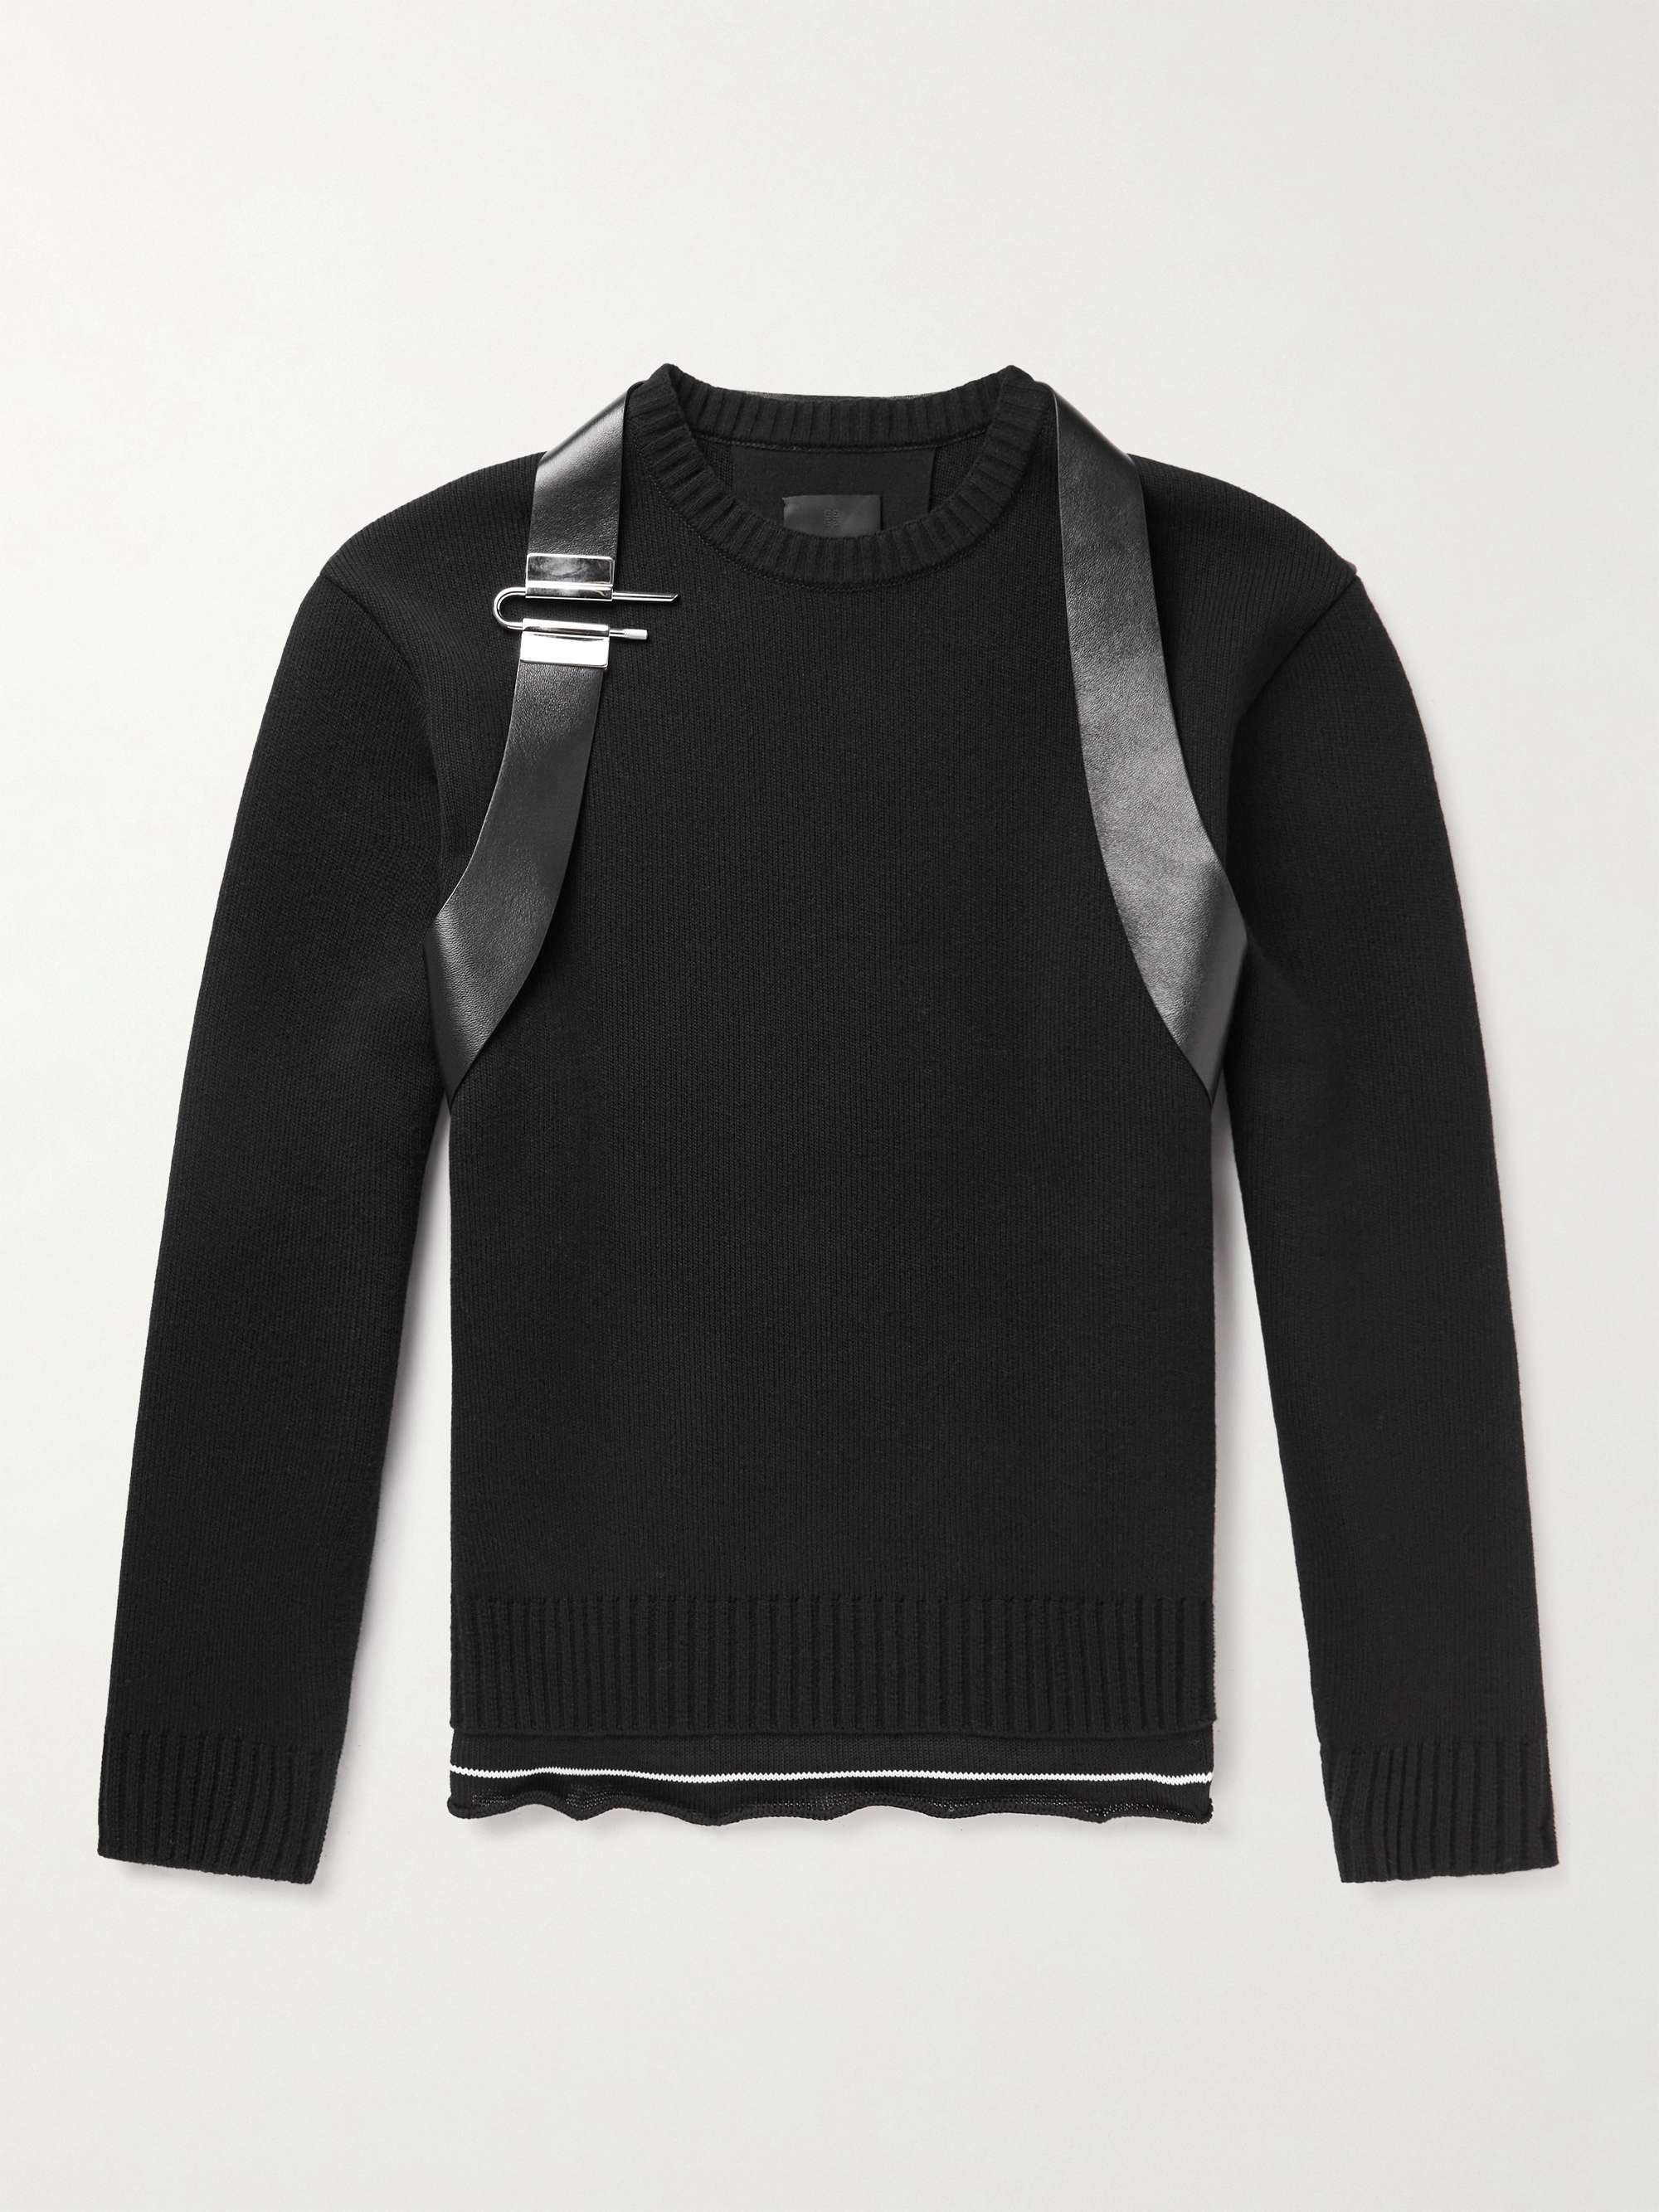 GIVENCHY Embellished Leather-Trimmed Wool Sweater